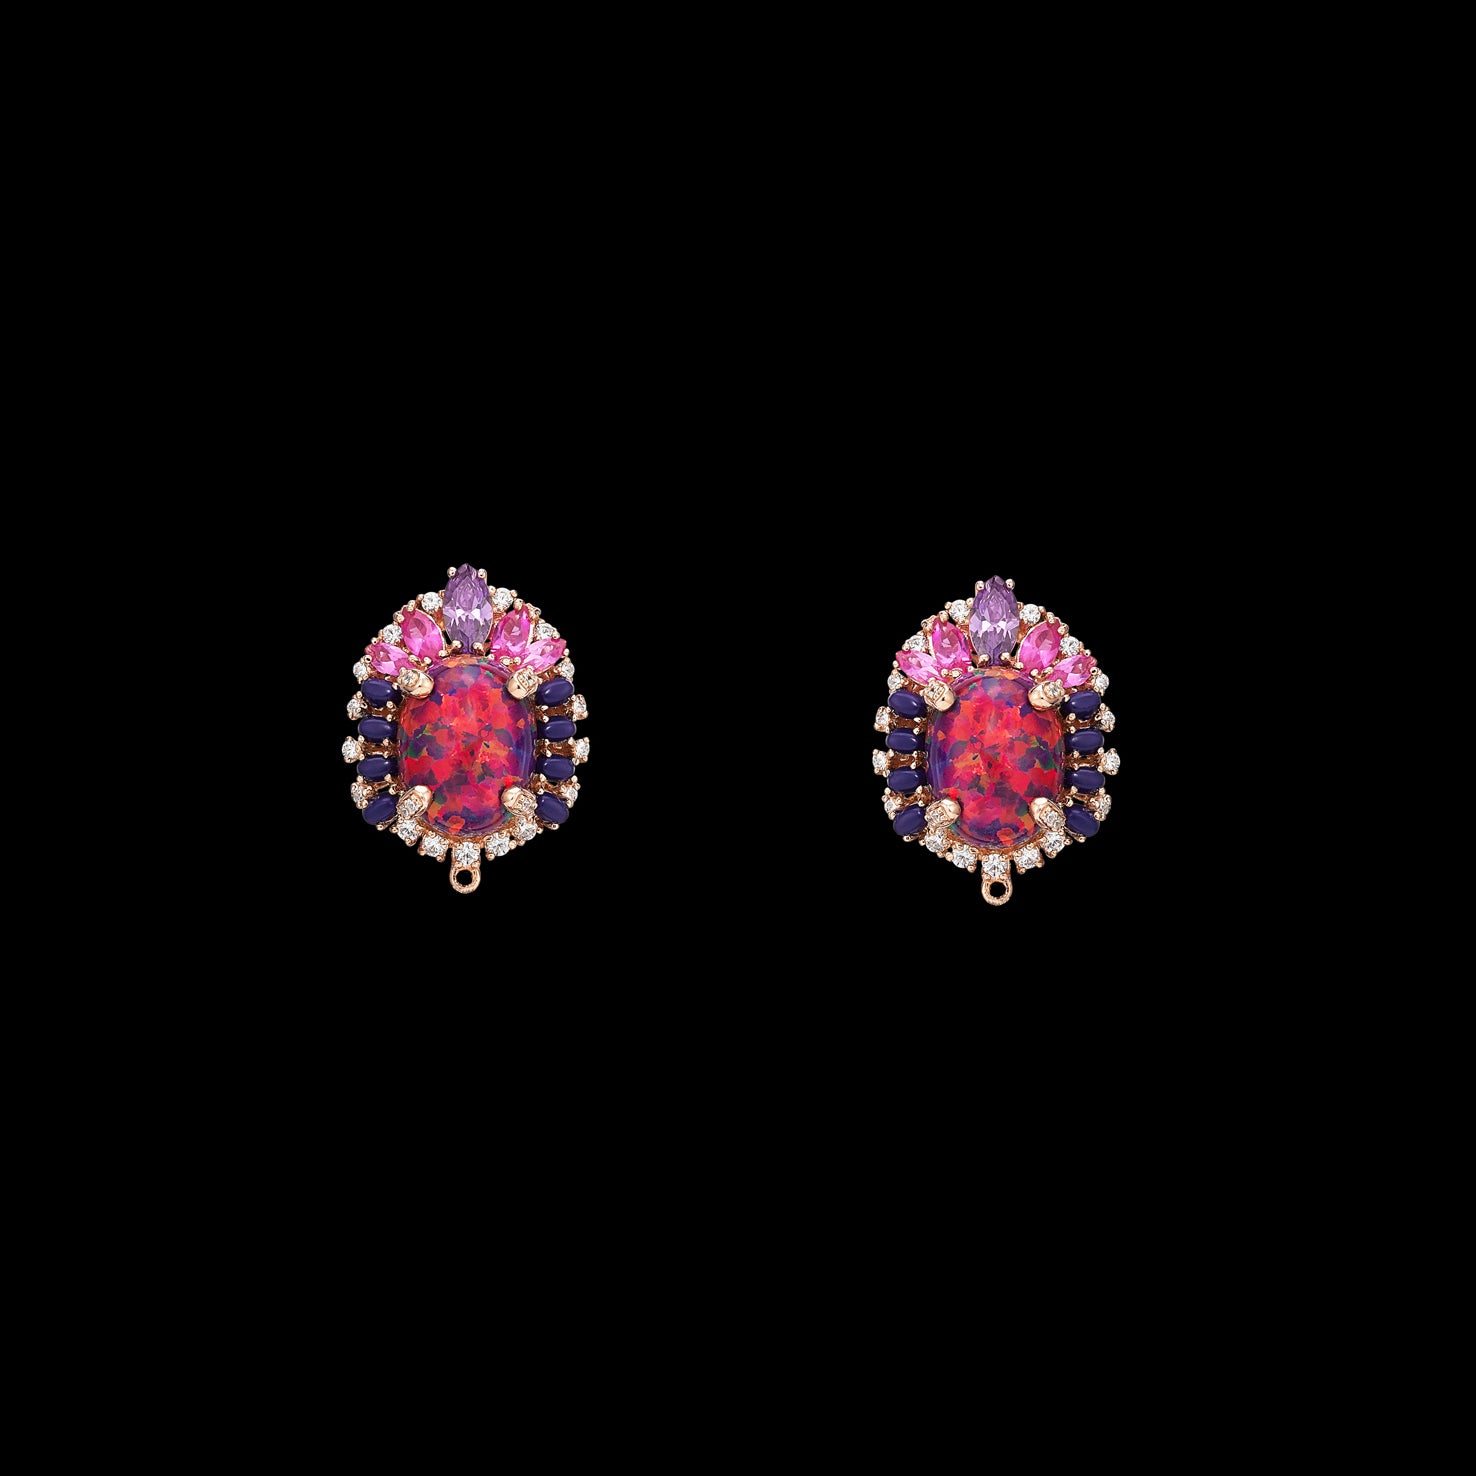 Violet Opal Nereides Earrings, Earring, Anabela Chan Joaillerie - Fine jewelry with laboratory grown and created gemstones hand-crafted in the United Kingdom. Anabela Chan Joaillerie is the first fine jewellery brand in the world to champion laboratory-grown and created gemstones with high jewellery design, artisanal craftsmanship and a focus on ethical and sustainable innovations.